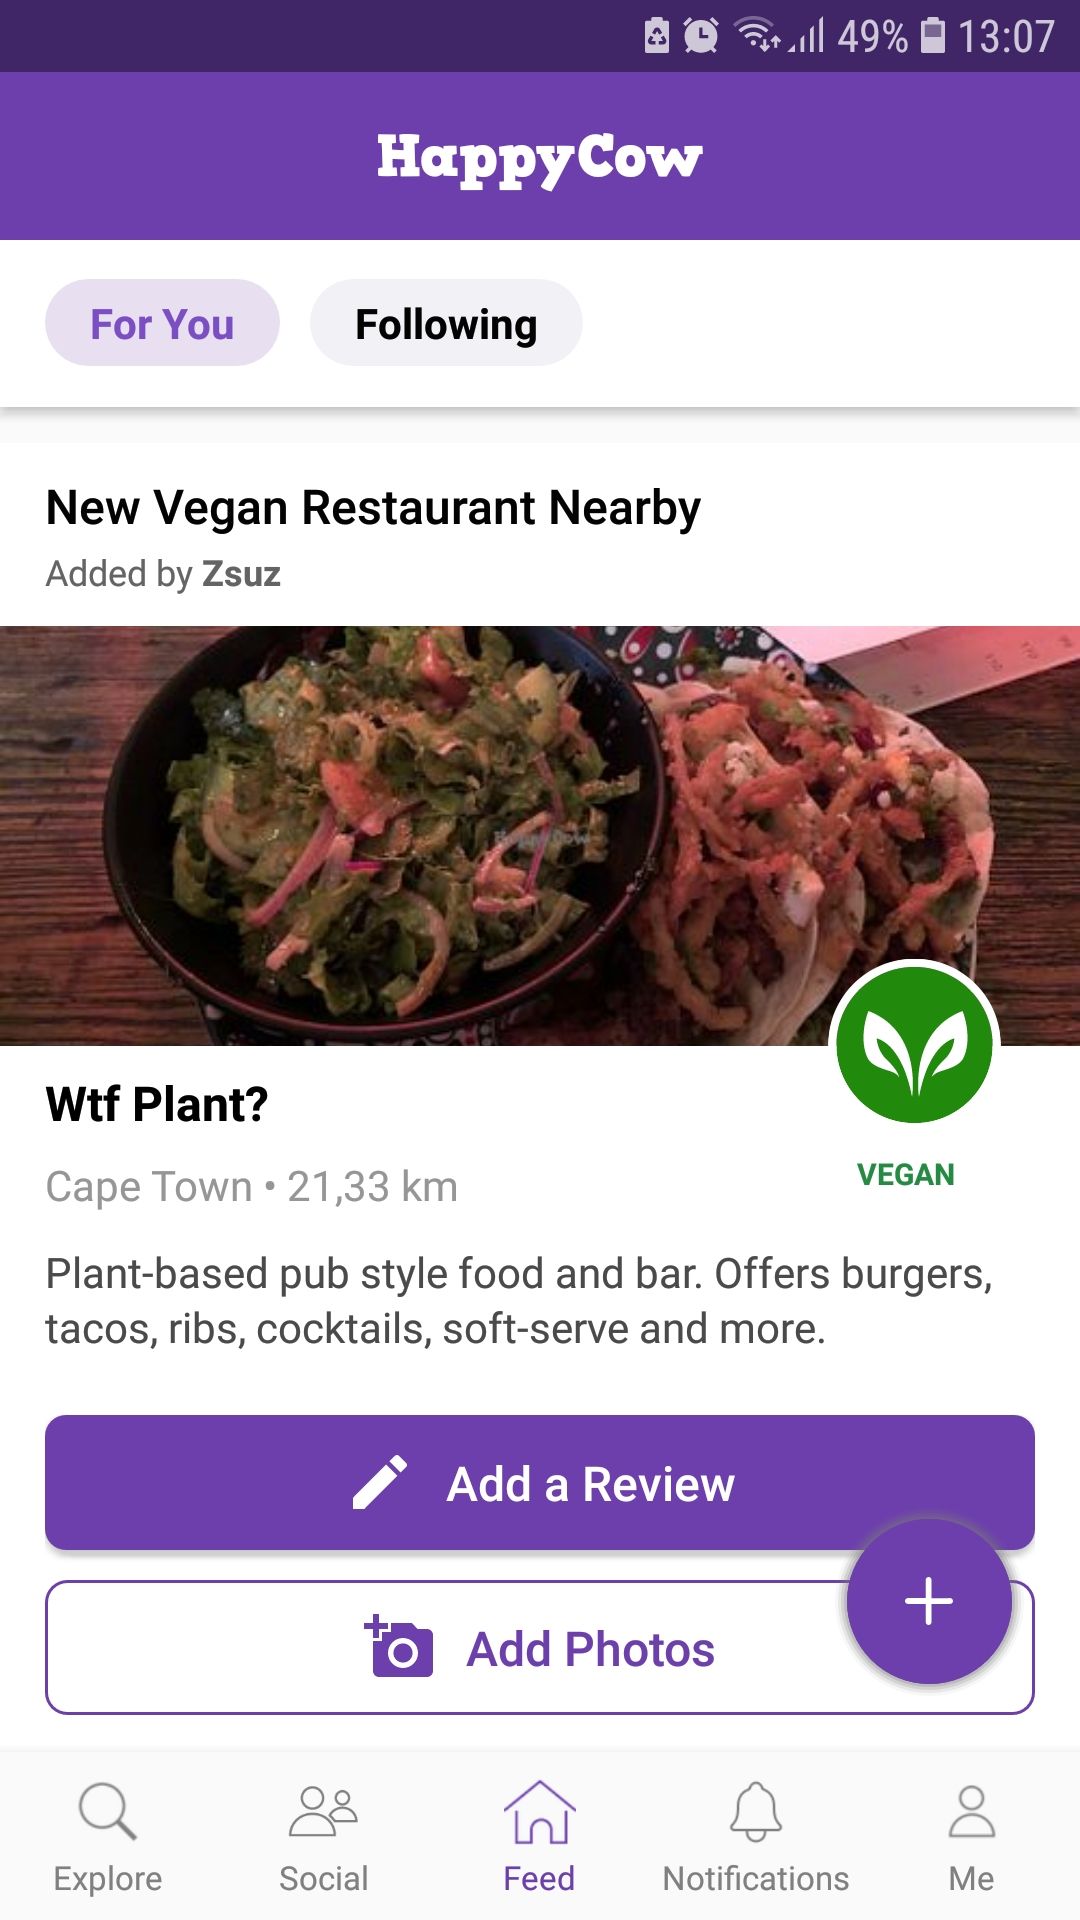 HappyCow mobile food app following